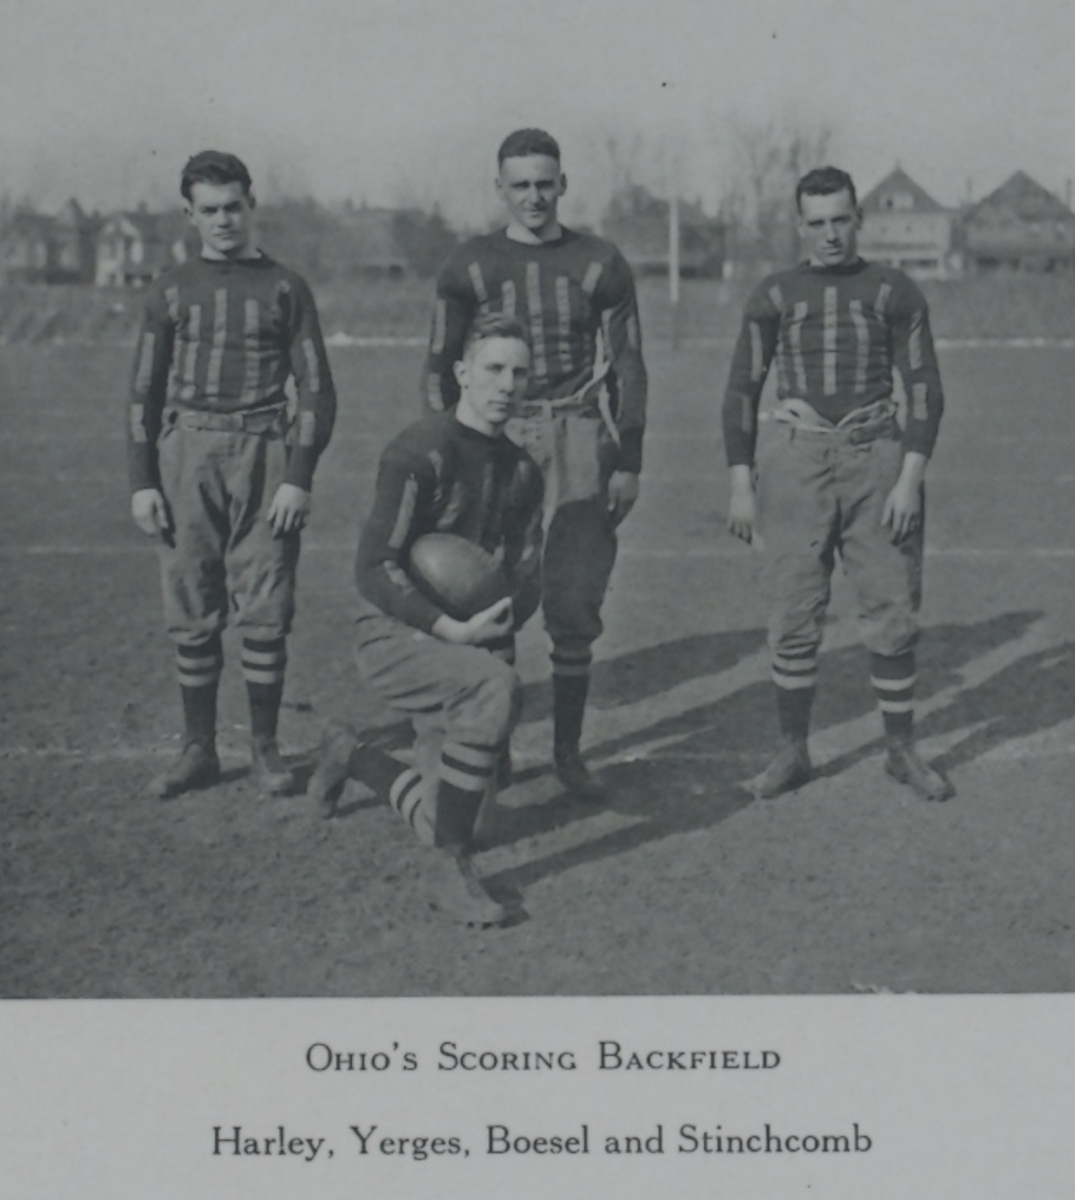 Howard Yerges Sr. with the 1917 Ohio State backfield